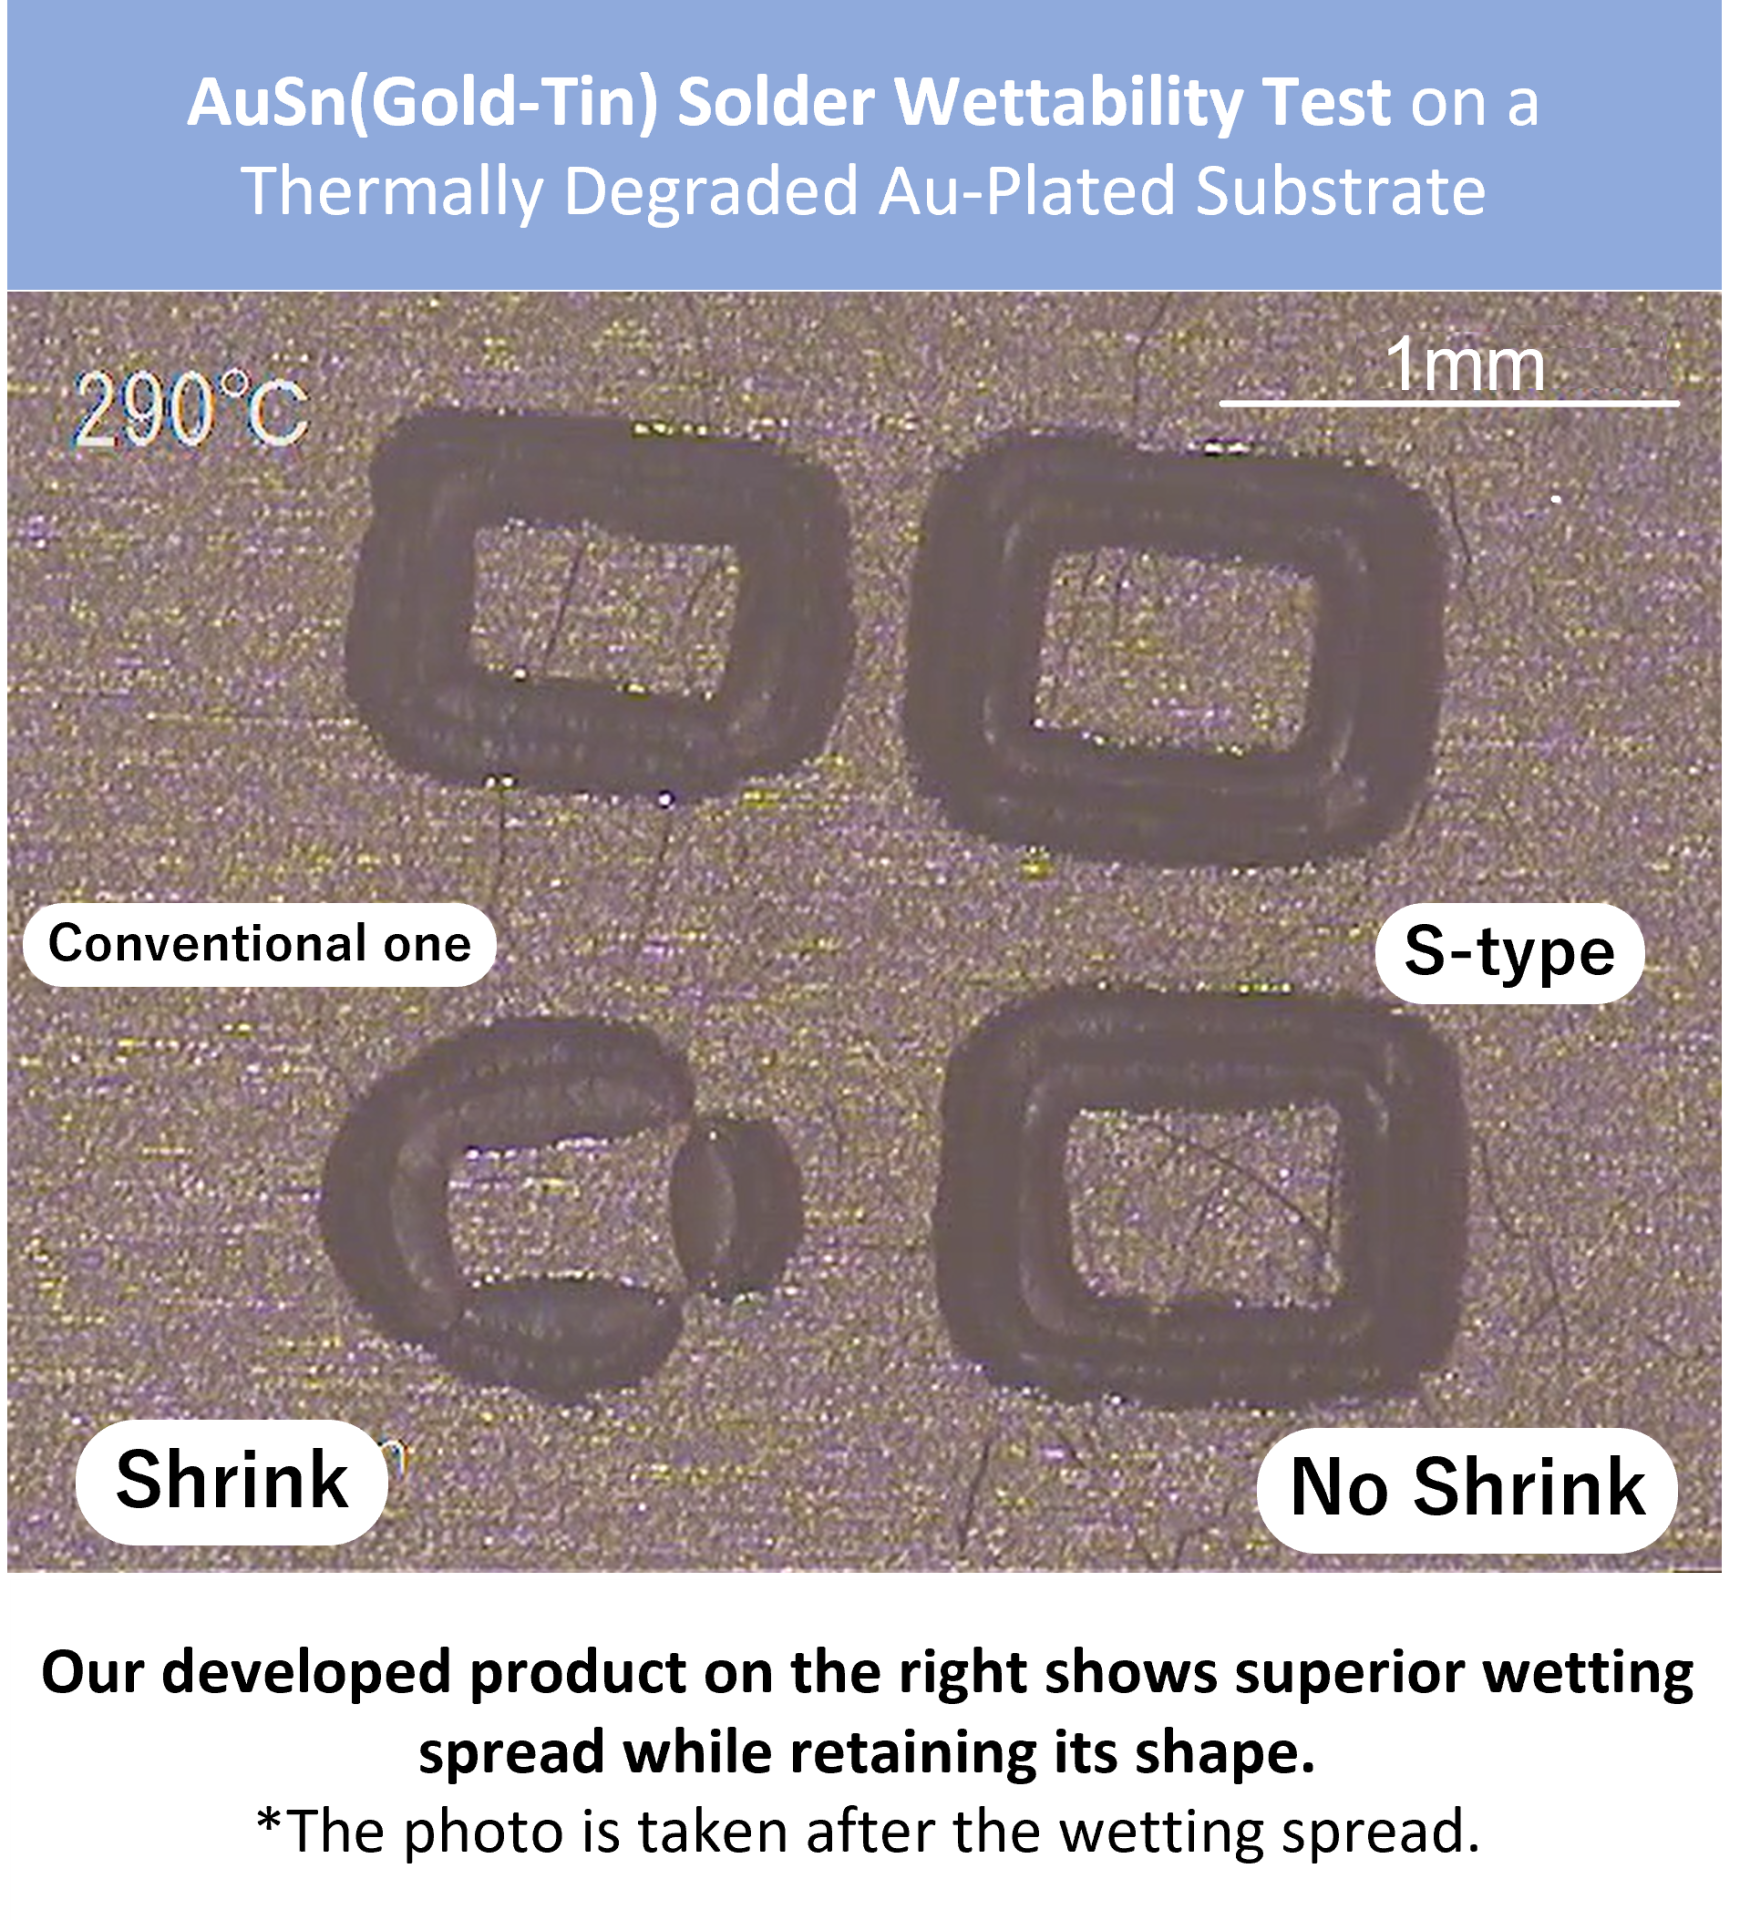 Wettability comparison on deteriorated substrate by heat treatment.